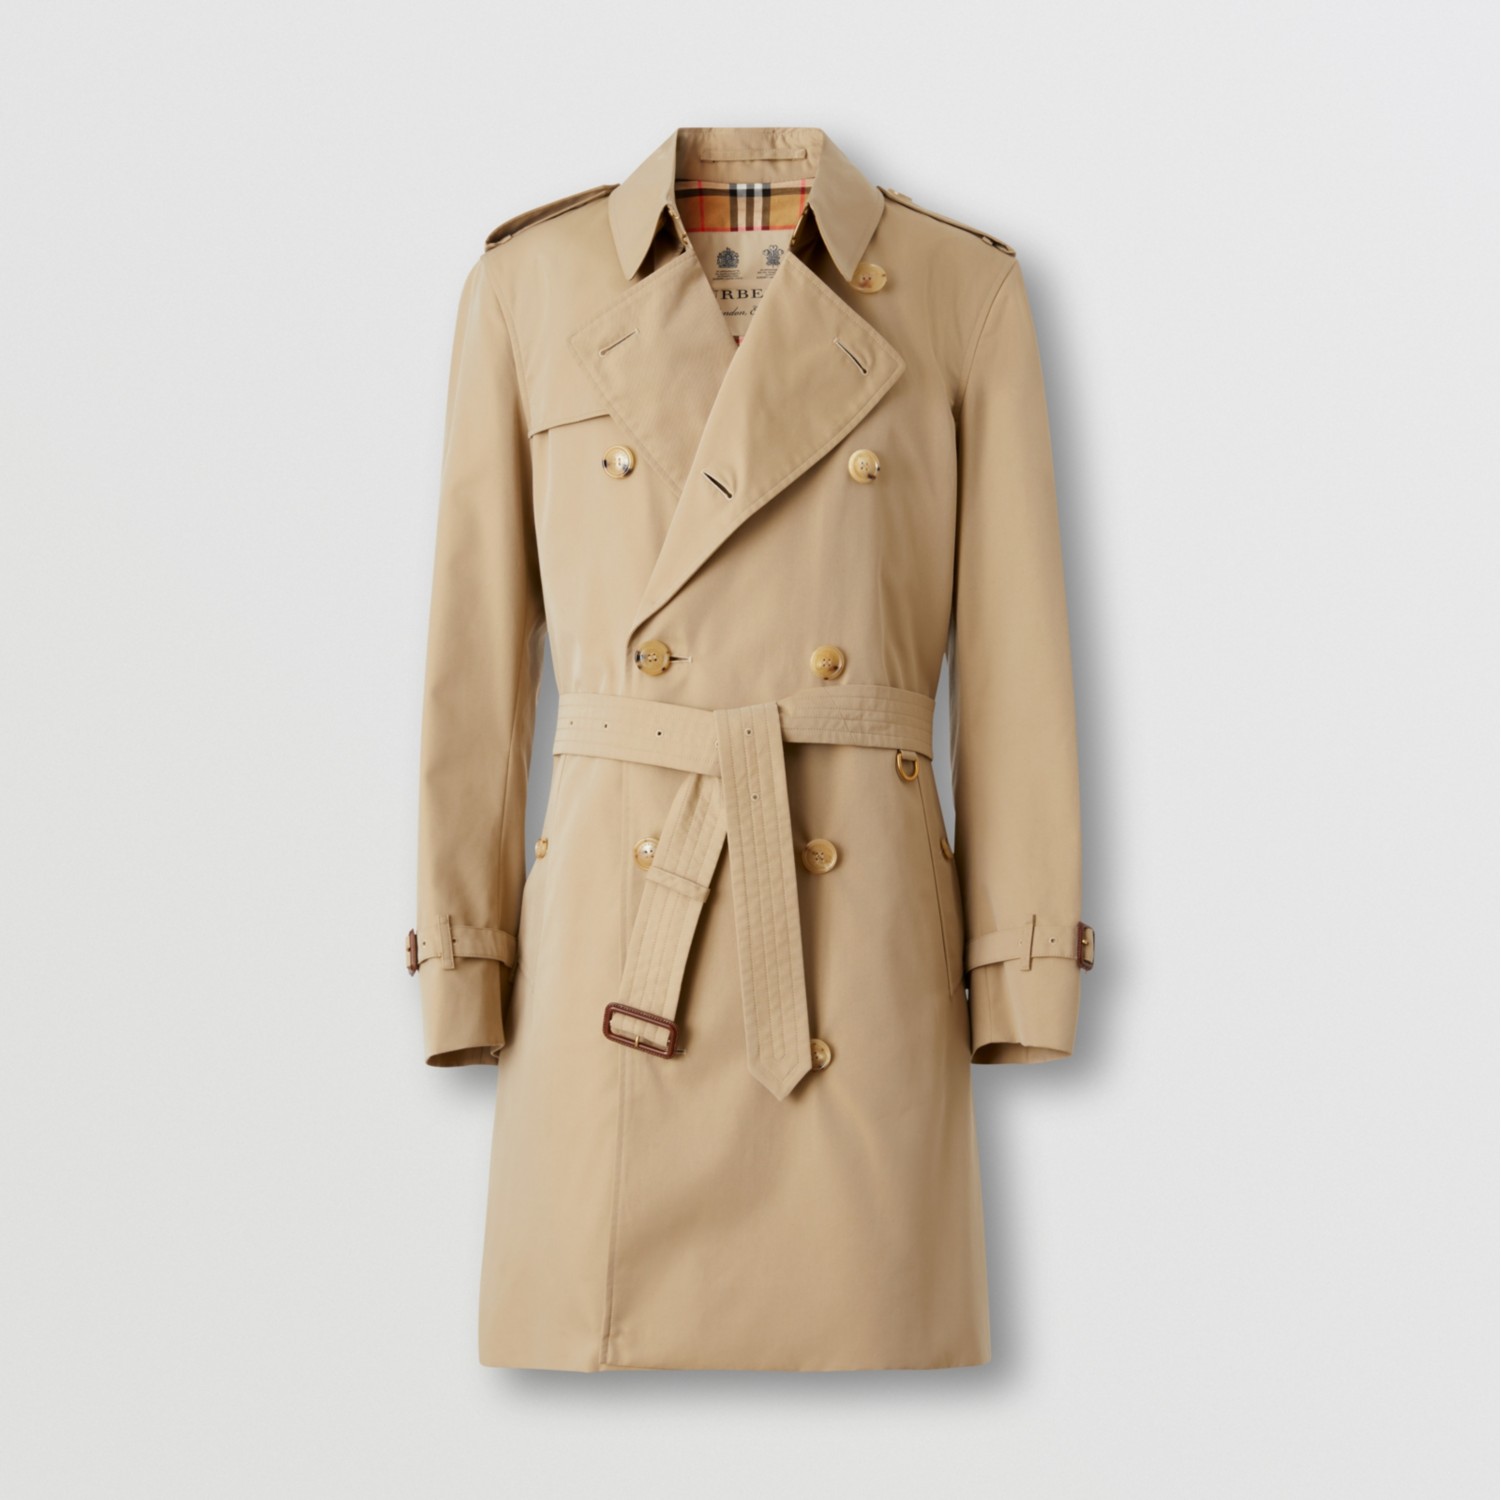 The Mid-length Chelsea Heritage Trench Coat